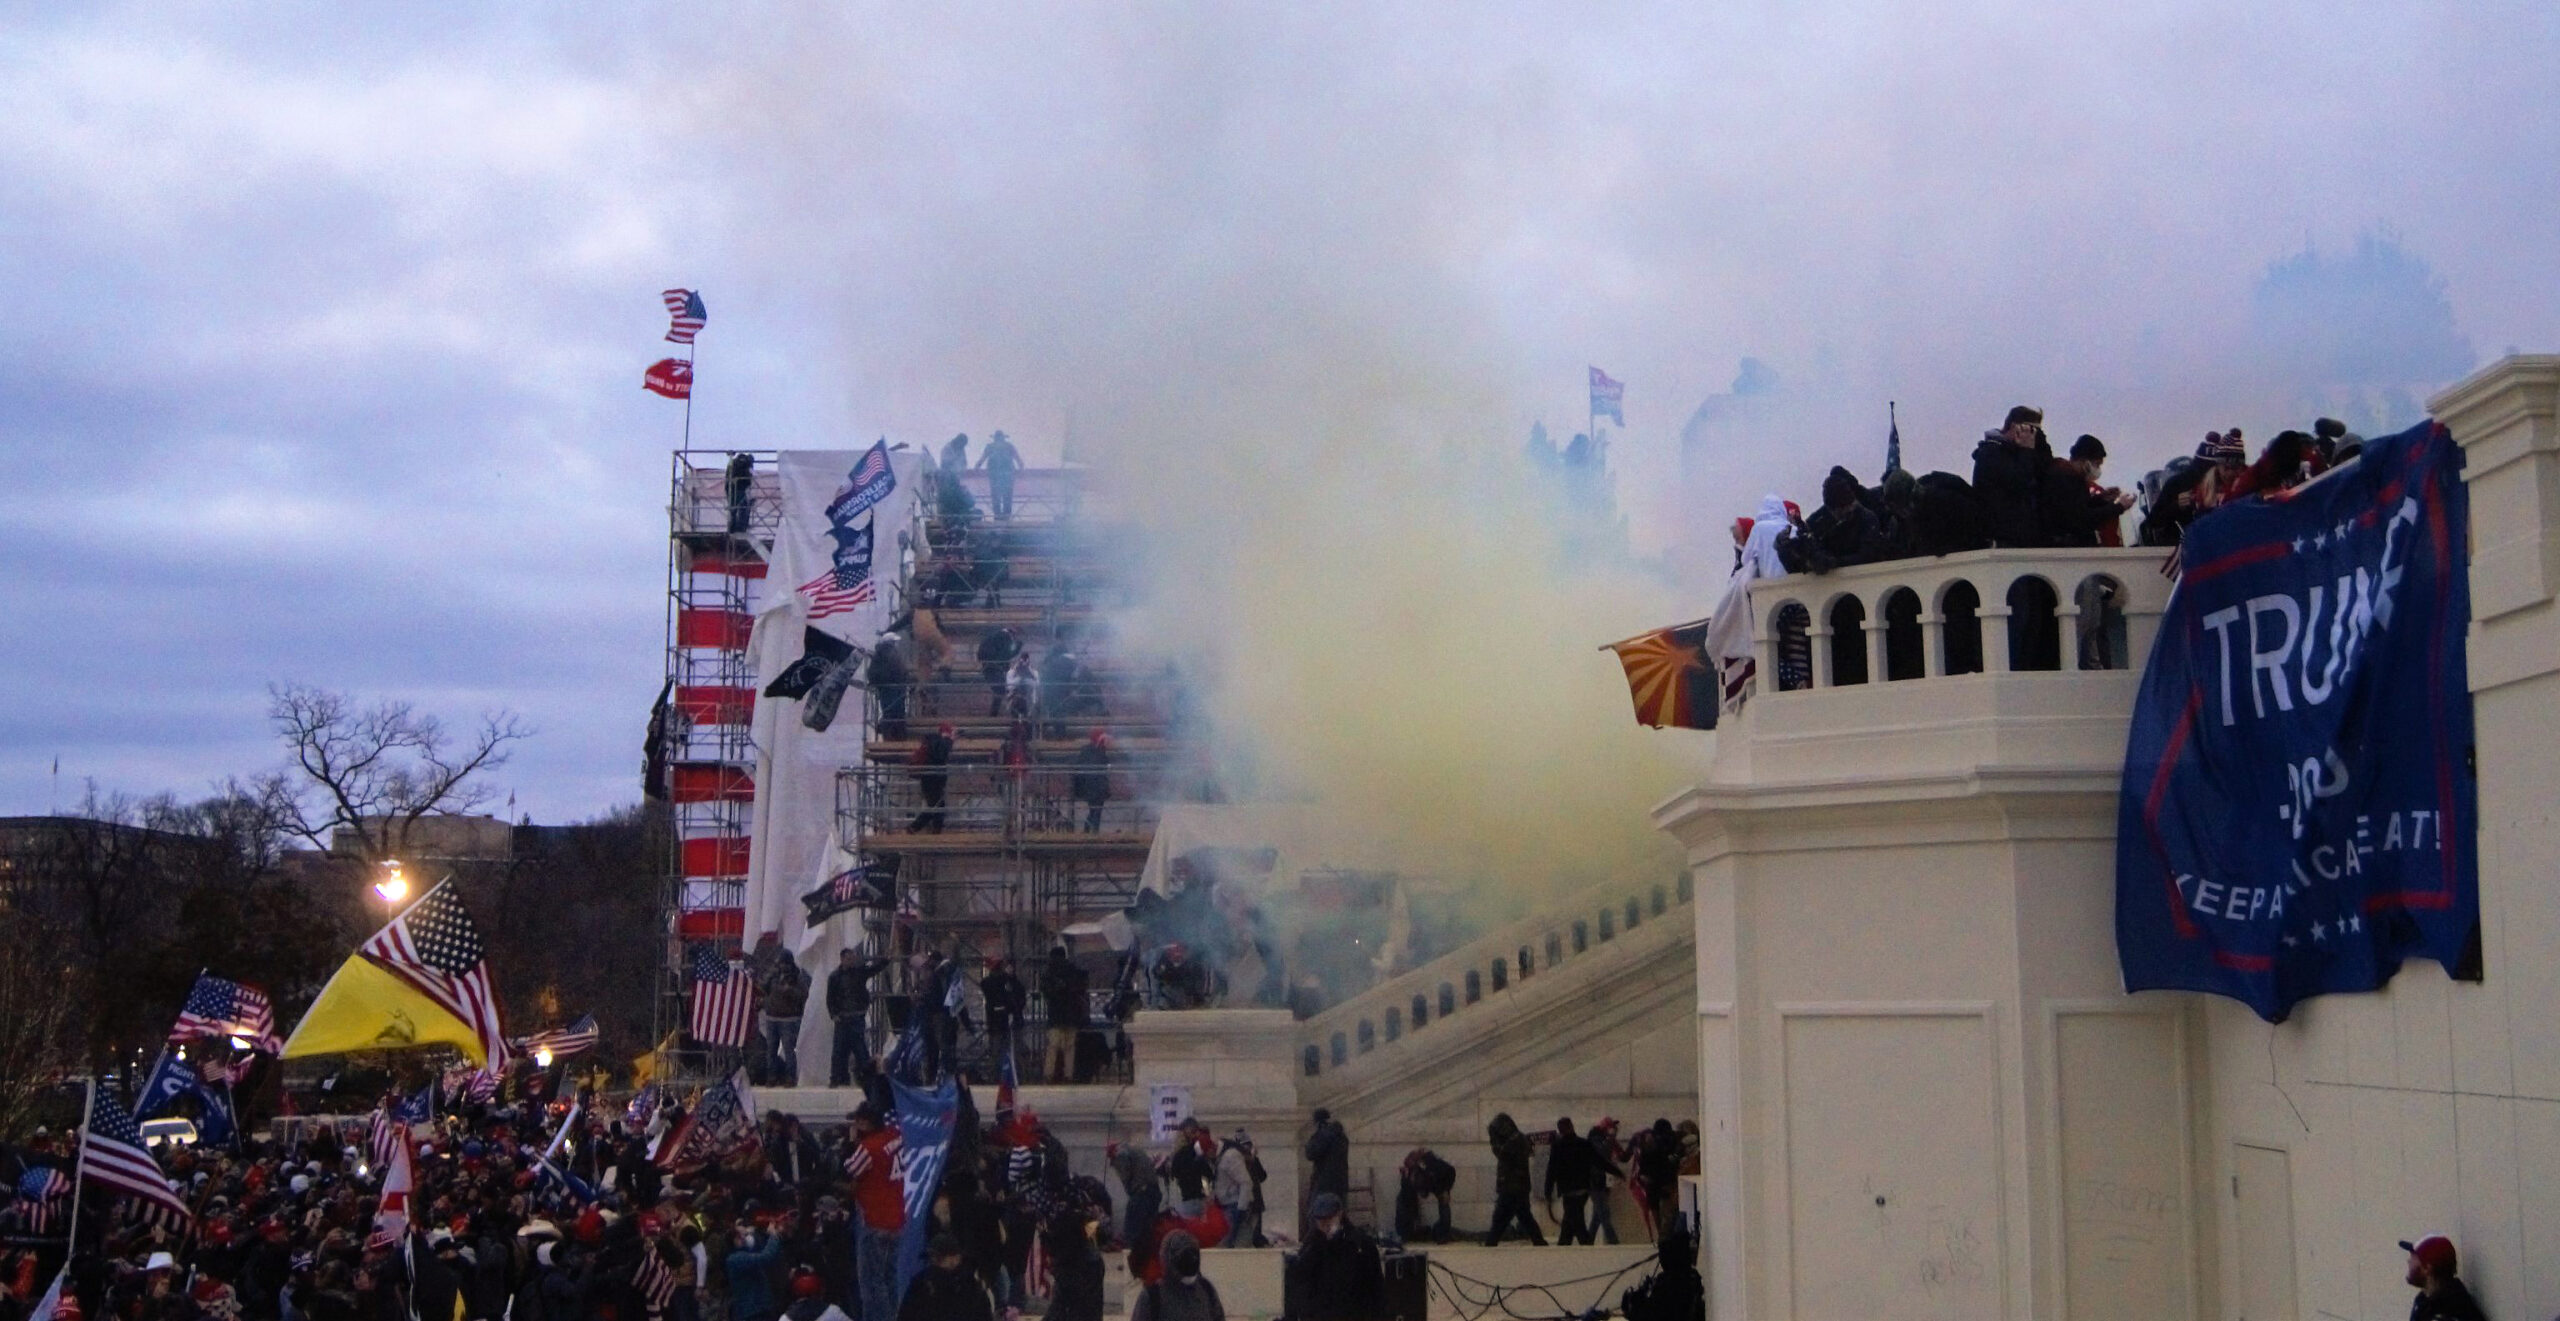 Tear gas is employed against insurrectionists on January 6th